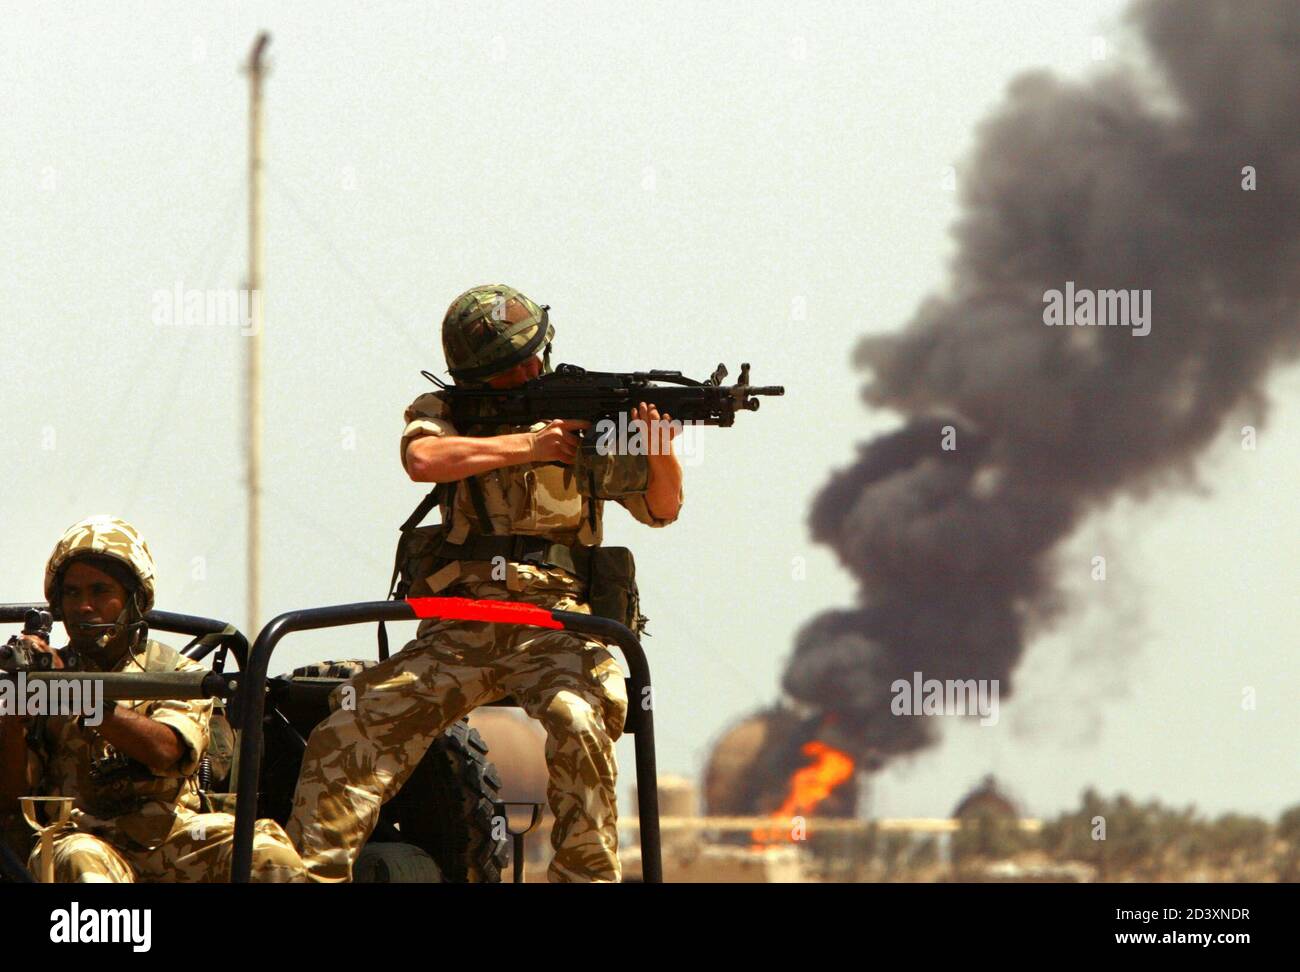 British soldiers aim their guns as they provide security on a road next to a burning liquid gas depot near Al Zubayr near Basra April 14, 2003. British forces said that the depot was looted before the fire broke out. Coalition forces blocked traffic in the main motorway leading to Baghdad as an explosion would effect an area of 6 km radius. REUTERS/Yannis Behrakis  YB/MA Stock Photo